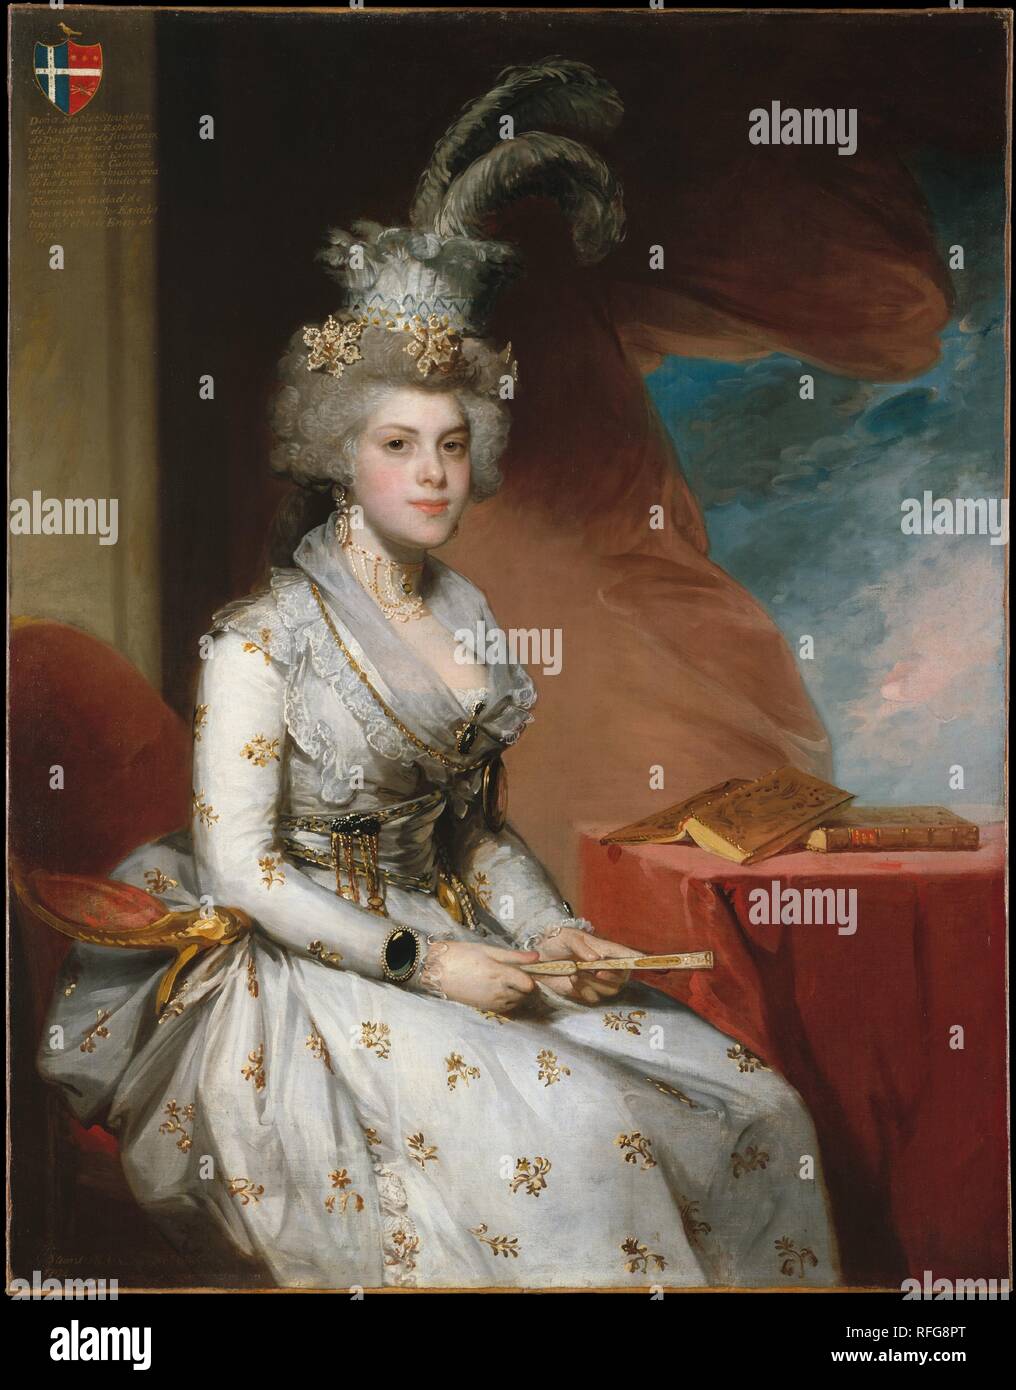 Matilda Stoughton de Jaudenes. Artist: Gilbert Stuart (American, North Kingston, Rhode Island 1755-1828 Boston, Massachusetts). Dimensions: 50 5/8 x 39 1/2 in. (128.6 x 100.3 cm). Date: 1794.  The sixteen-year-old bride of Josef de Jáudenes, Matilda Stoughton (1778-after 1822), was an American whose father served as Spain's consul in Boston for thirty years. Although her richly fashionable costume and jewelry would have been regarded as excessive for a young Anglo-Saxon, the splendor was completely appropriate for the wife of a wealthy and ambitious Spanish diplomat. Matilda's portrait is a ha Stock Photo